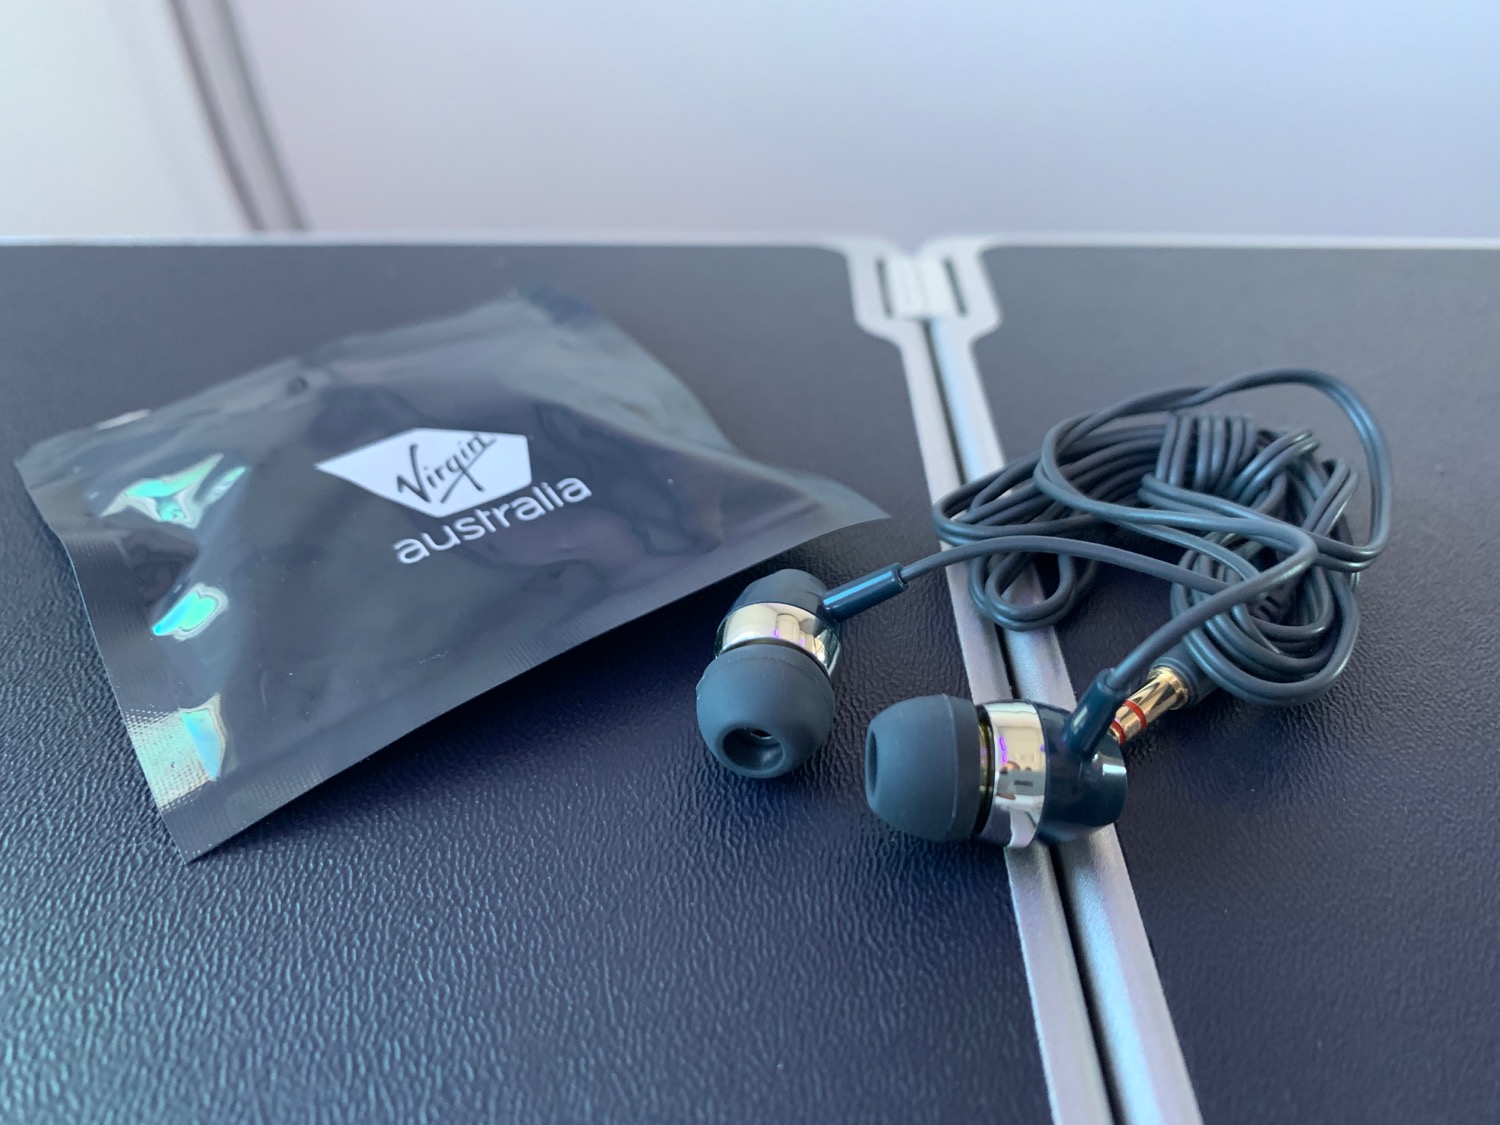 a pair of black earbuds on a black surface